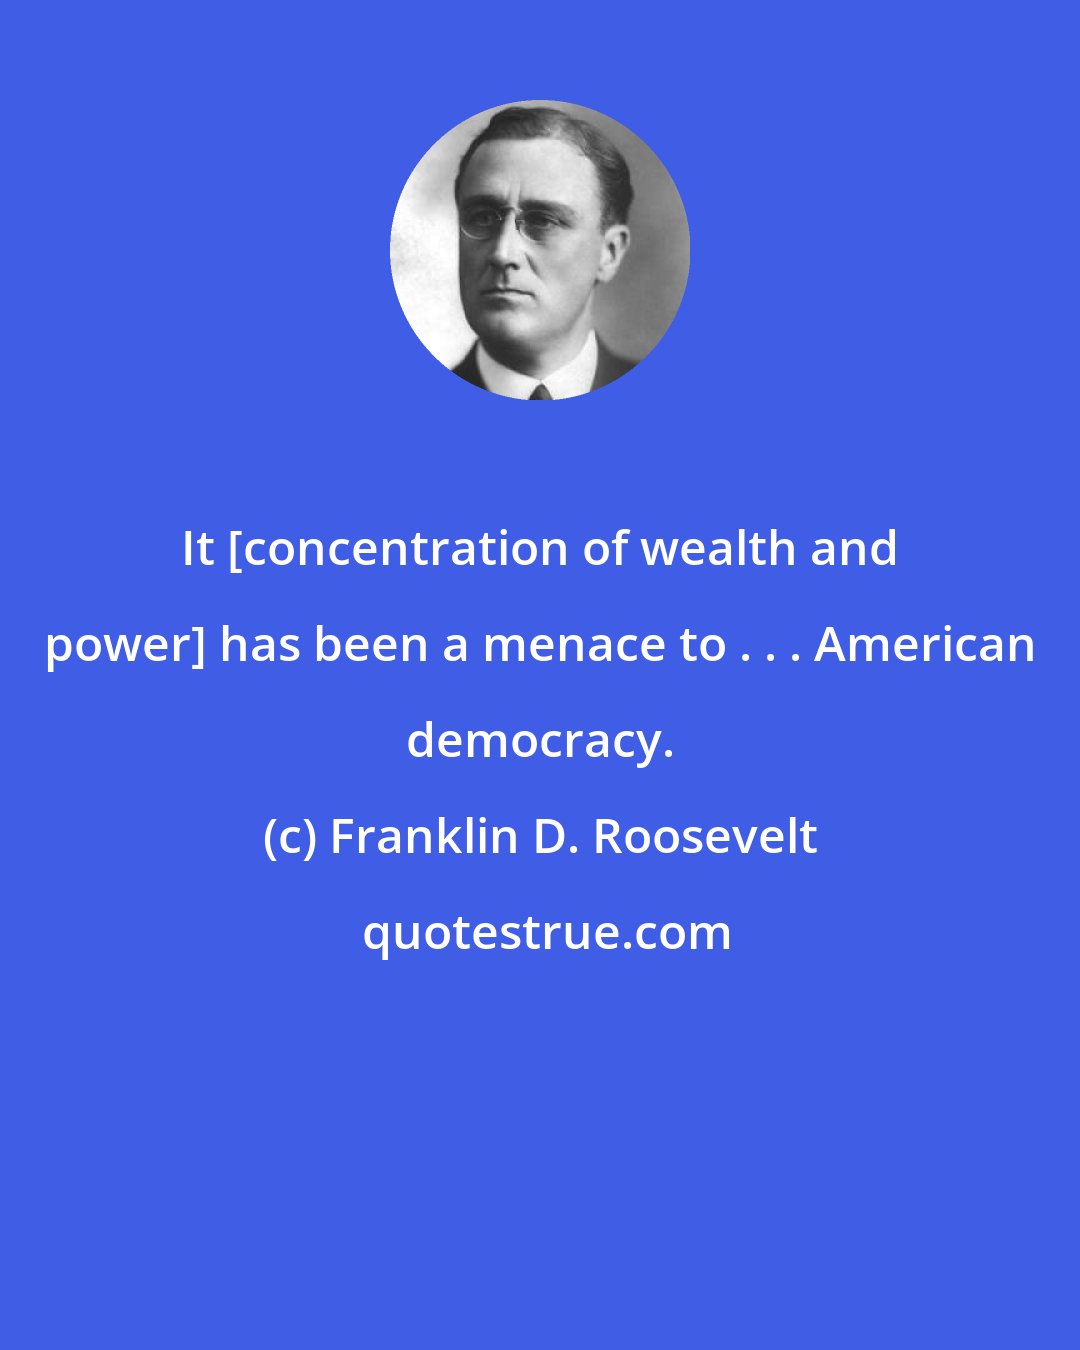 Franklin D. Roosevelt: It [concentration of wealth and power] has been a menace to . . . American democracy.